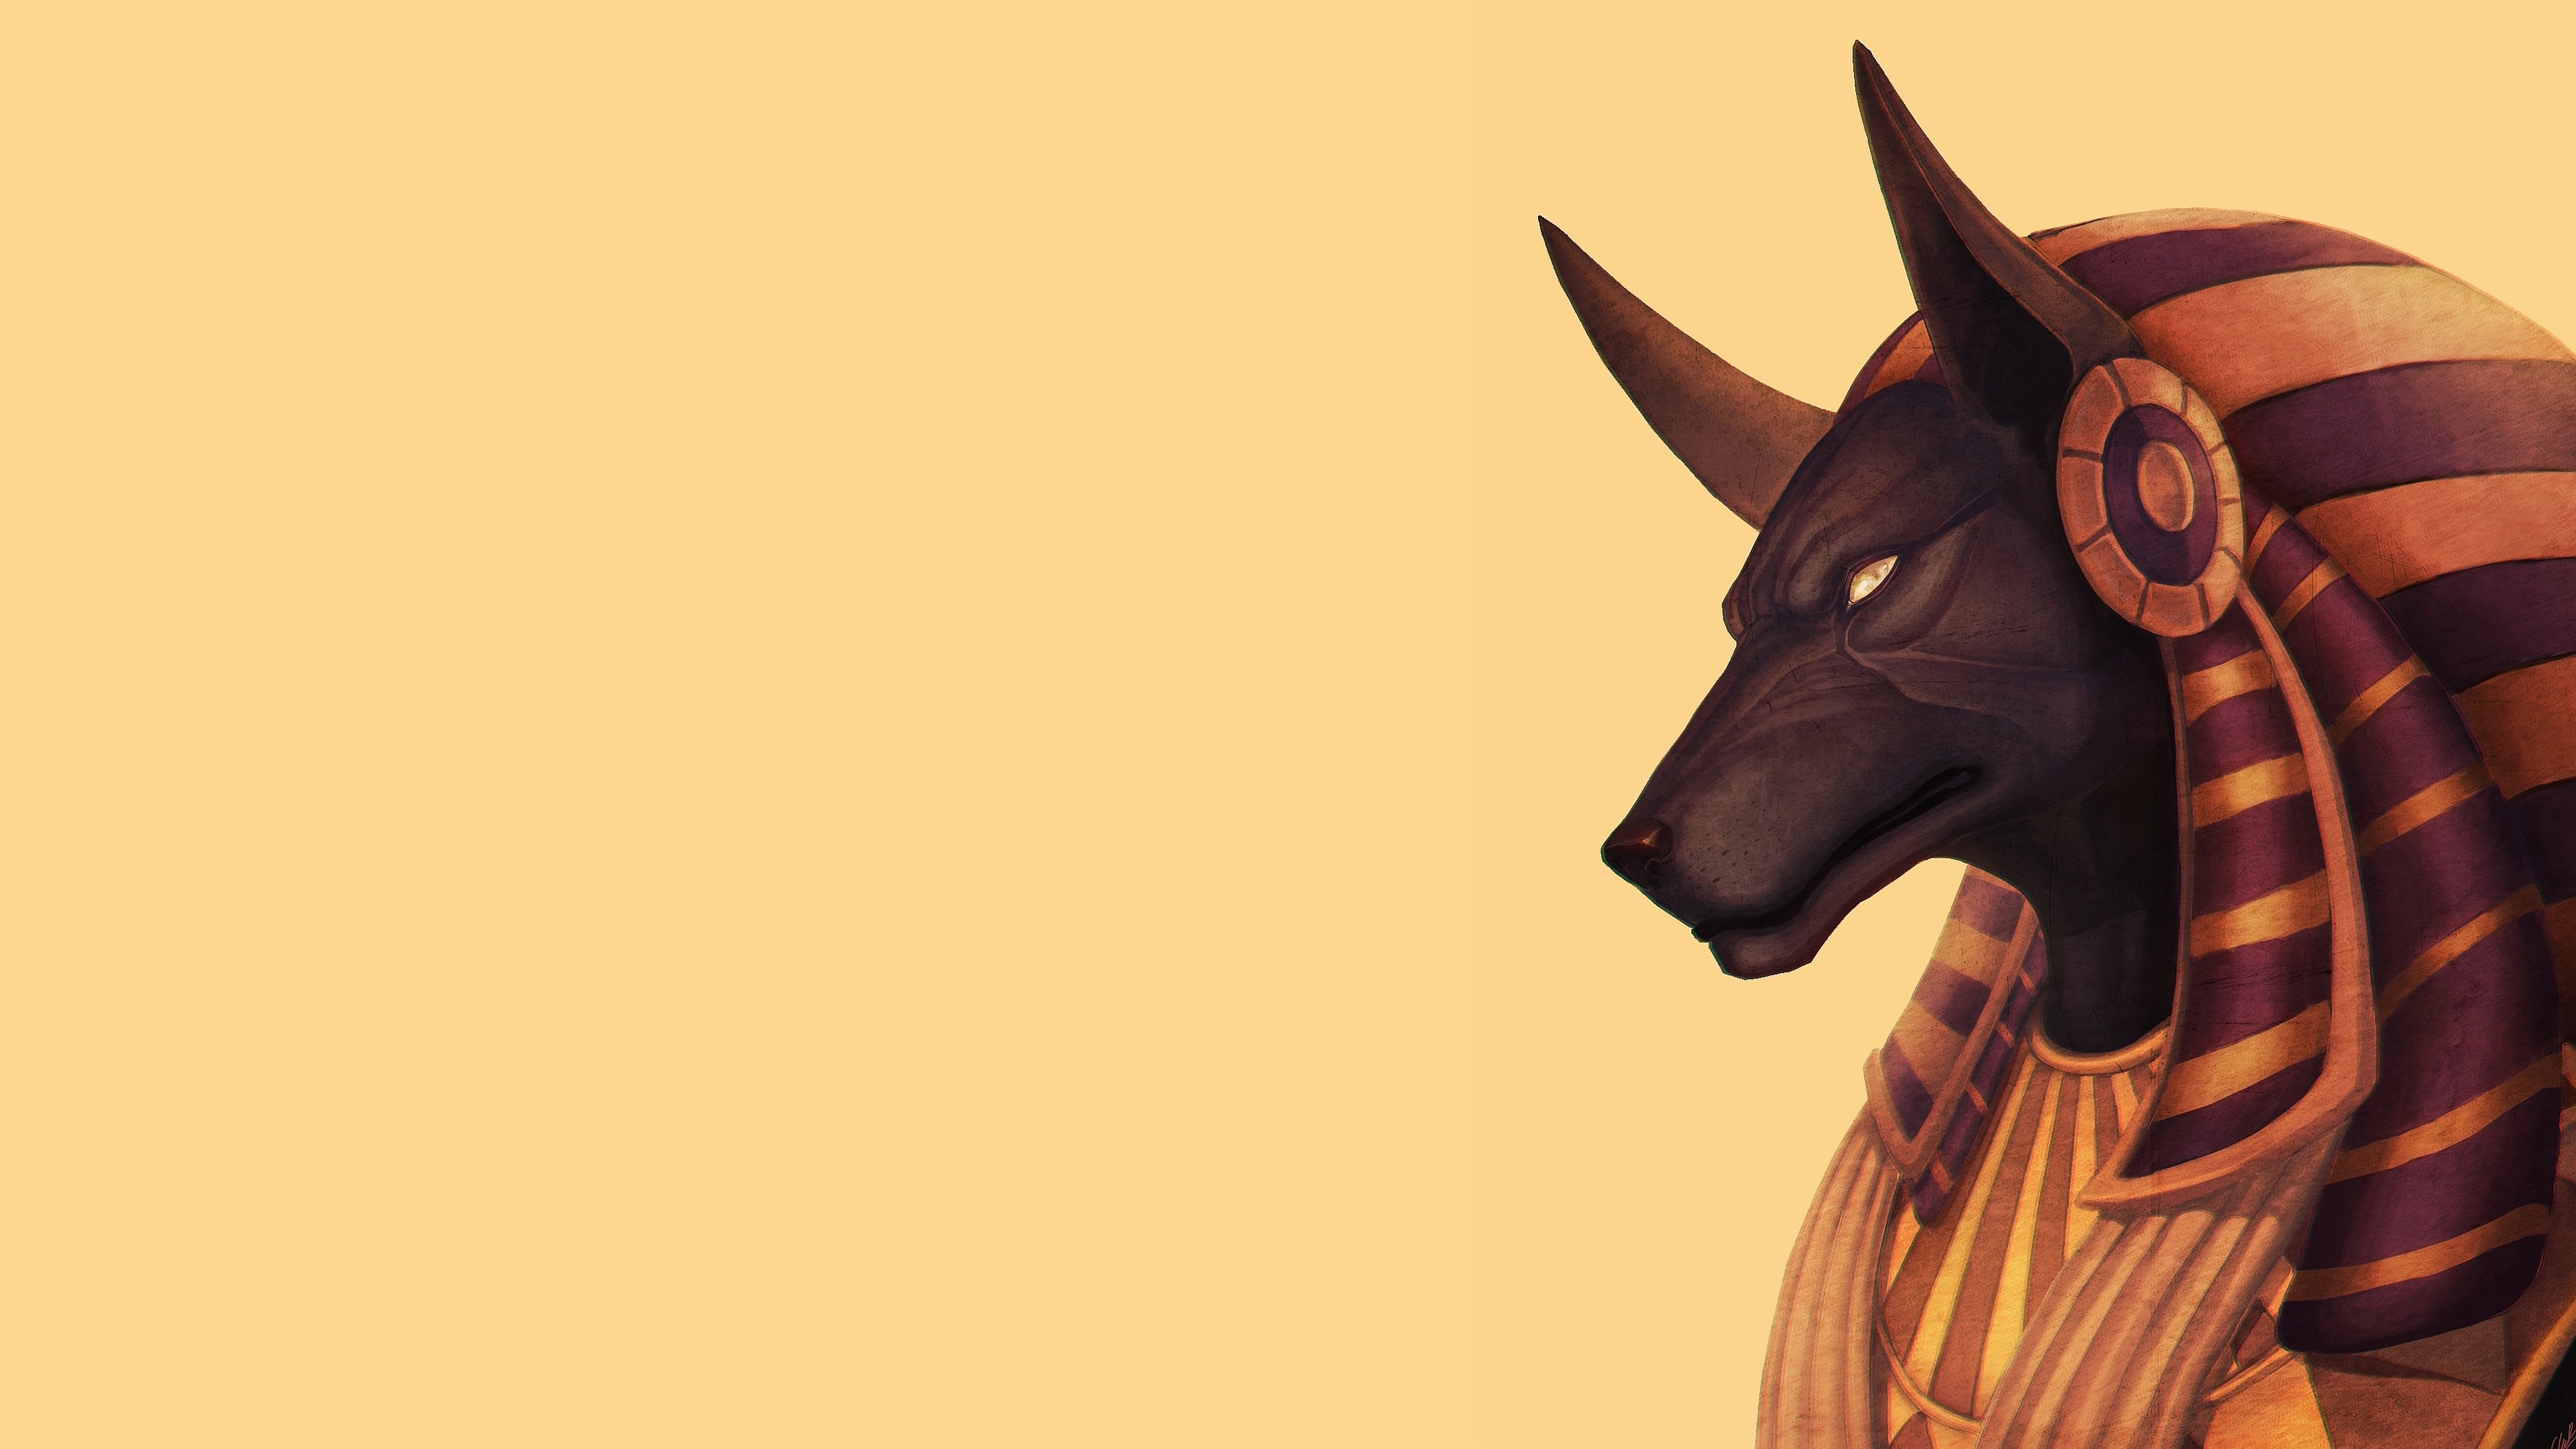 3750x2109 View, download, comment, and rate this  Anubis Wallpaper -  Wallpaper Abyss